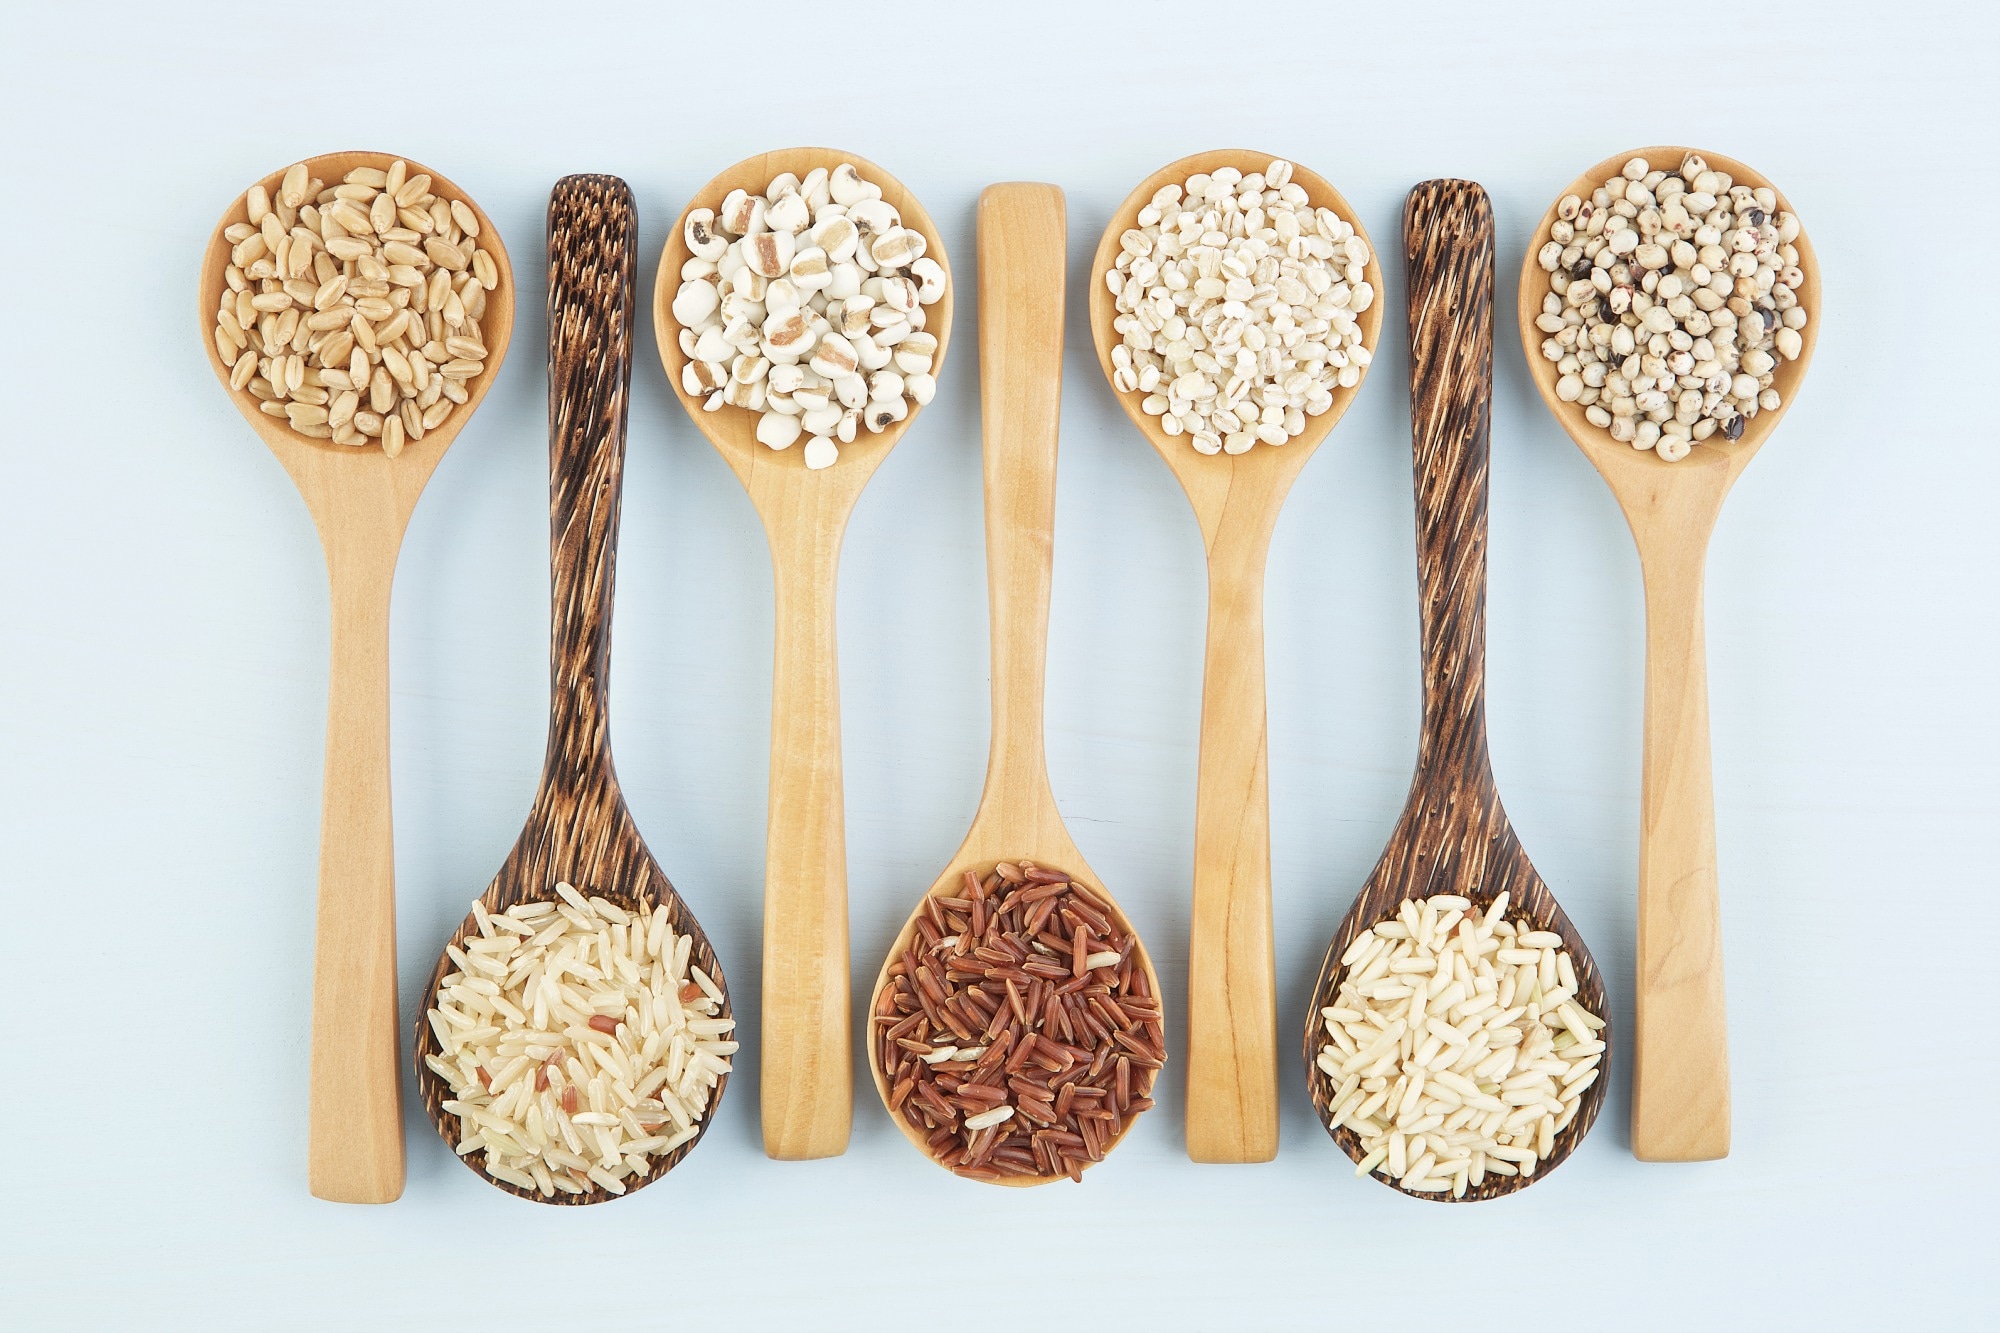 Study: The relationship between whole-grain intake and measures of cognitive decline, mood, and anxiety – a systematic review. Image Credit: kireewongfoto/Shutterstock.com